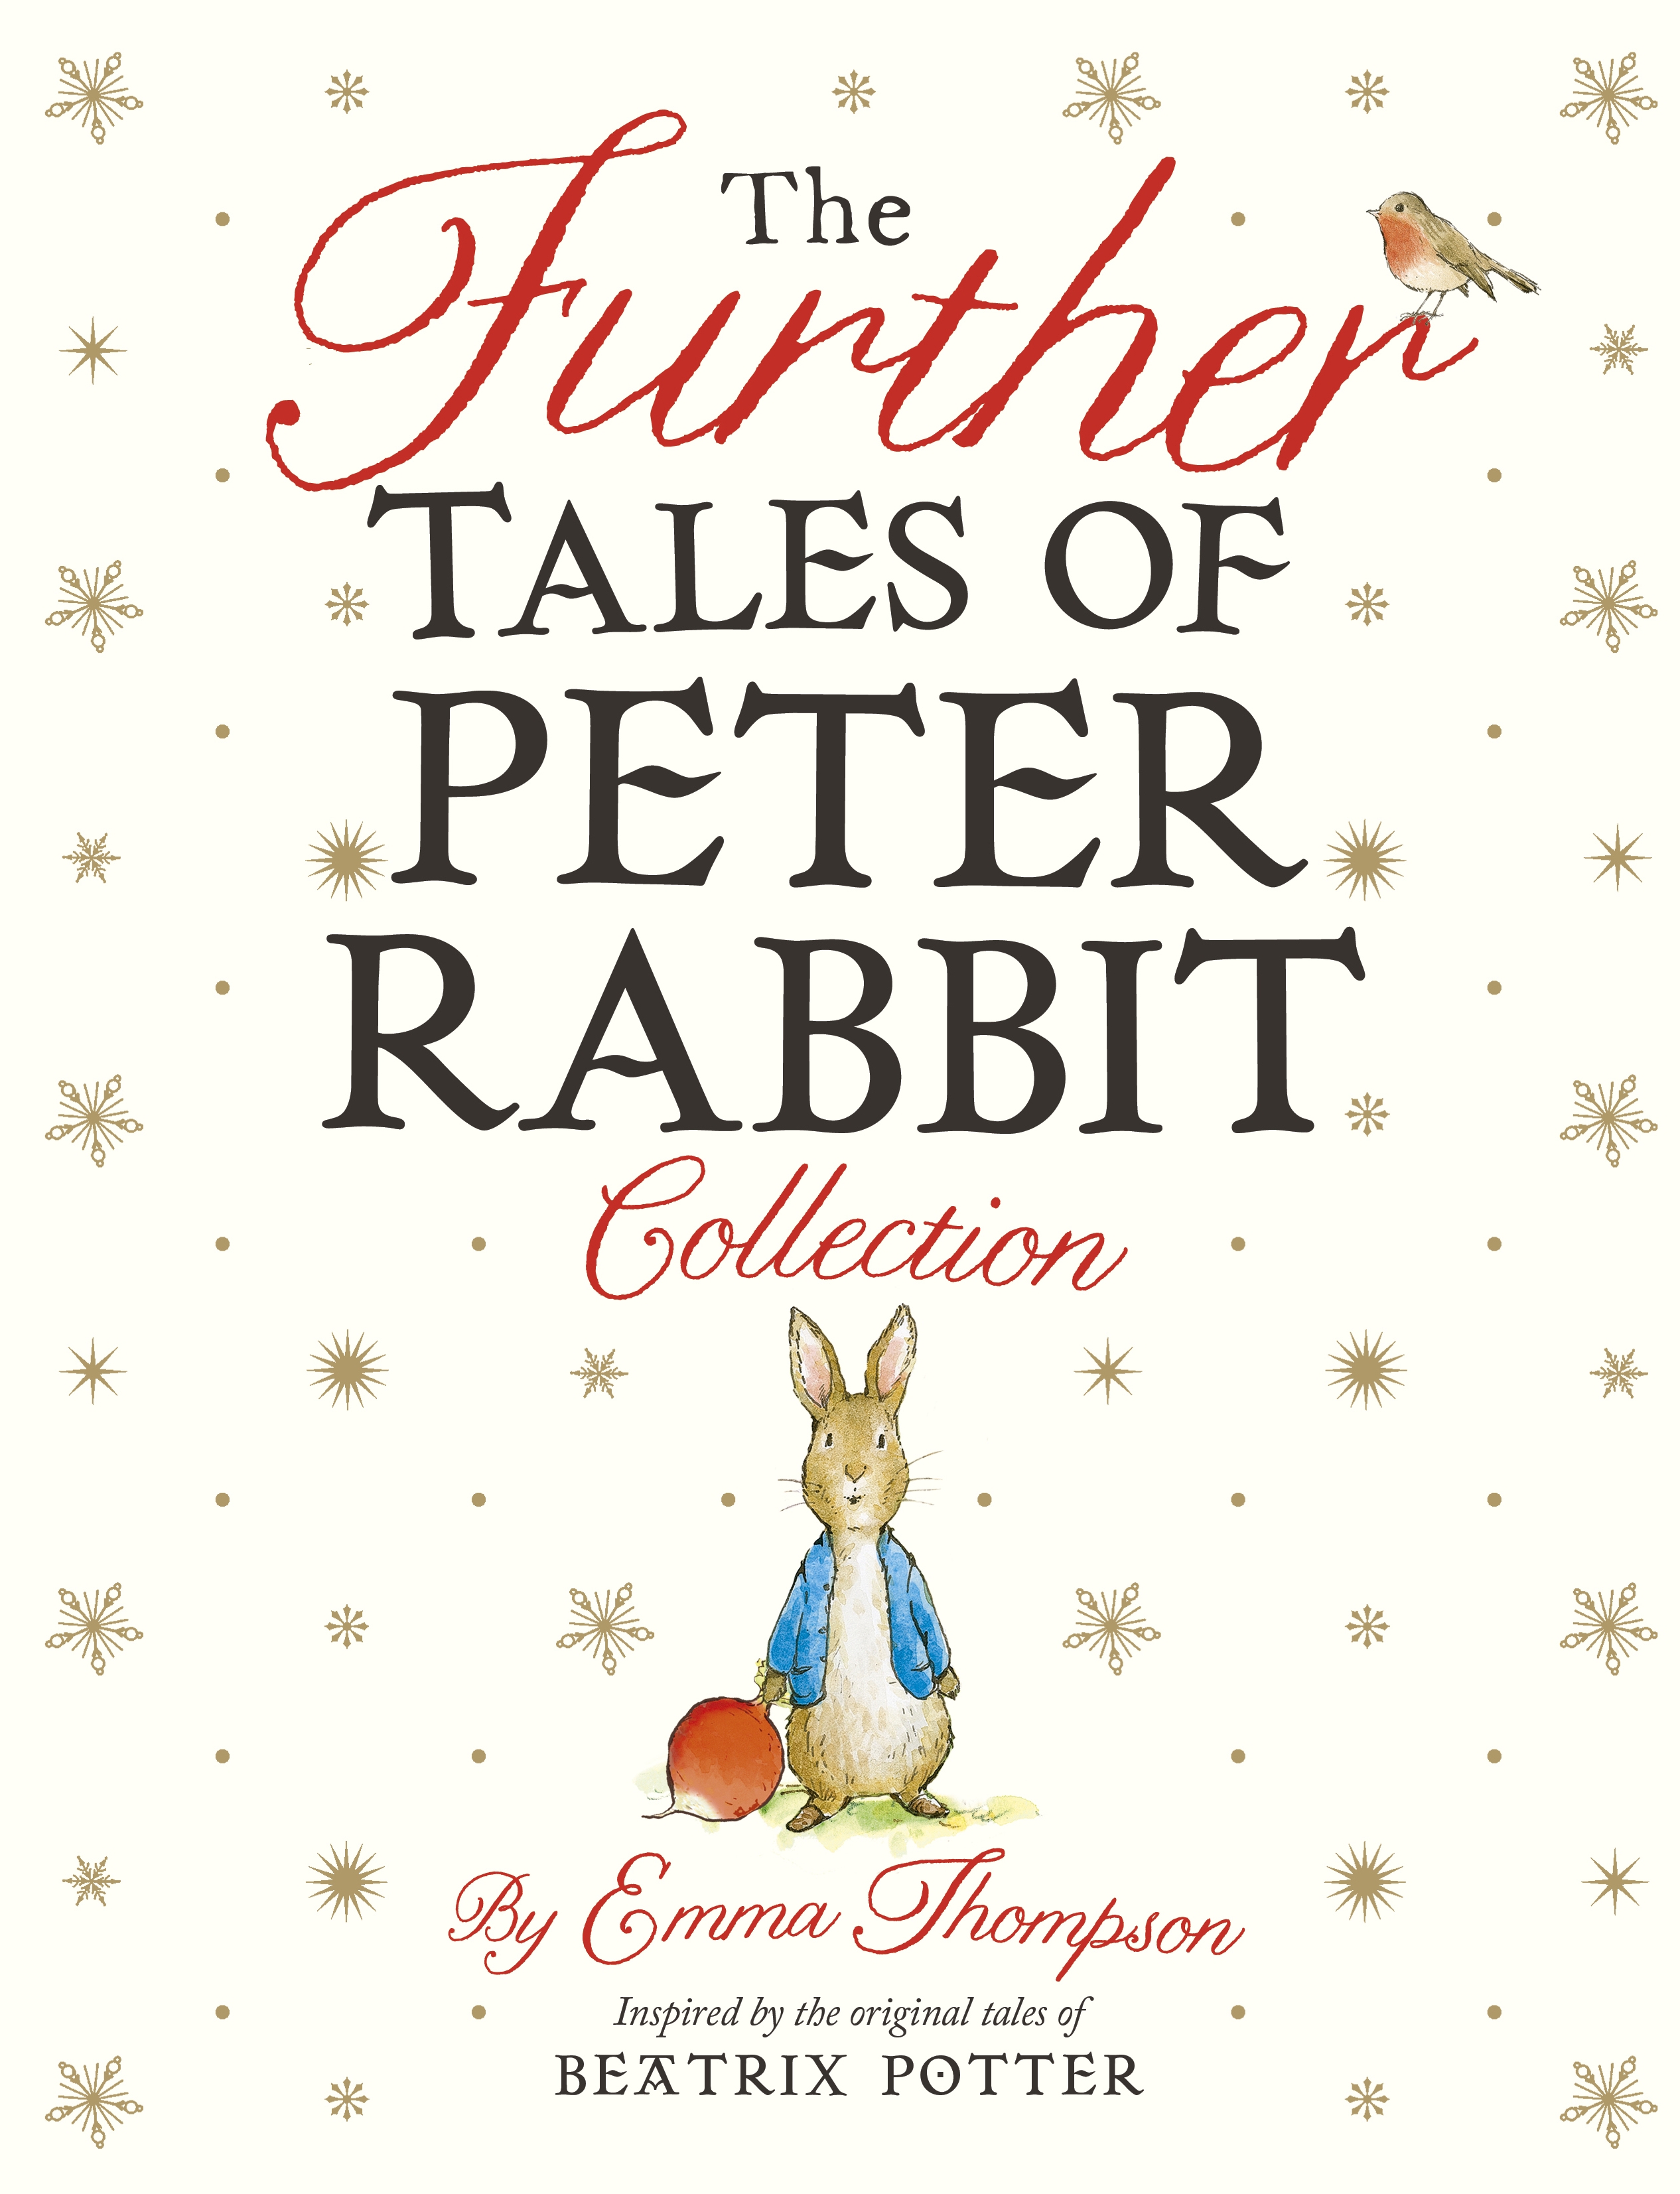 The Complete Tales of Peter Rabbit